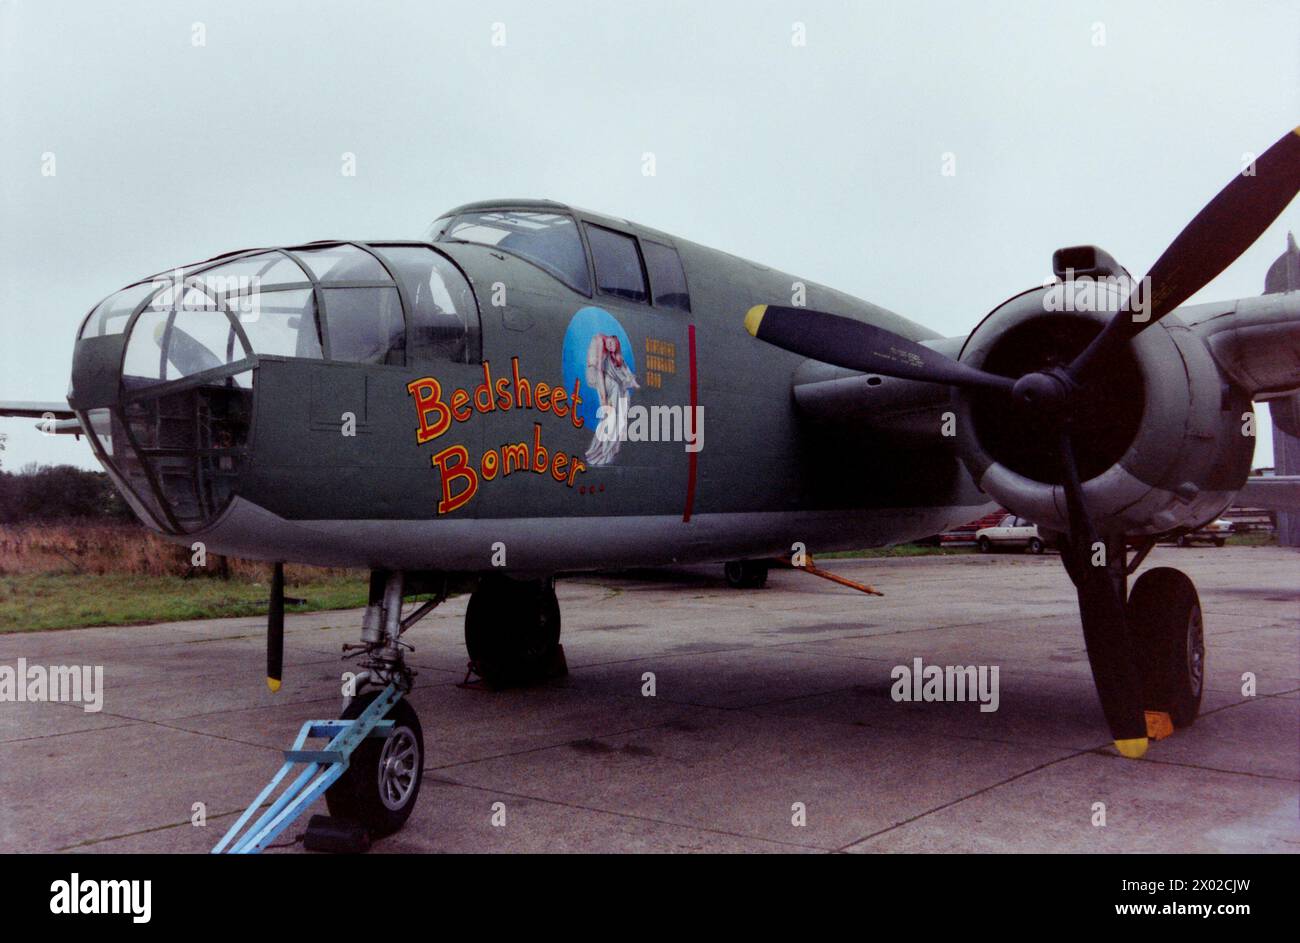 North American B-25 Mitchell Second World War bomber plane N9089Z named Bedsheet Bomber, seen at North Weald airfield in 1989. Delivered to the USAAF as 44-30861. Registered as N9089Z in 1959. To the UK for filming in 1963. Withdrawn from use at Biggin Hill in 1964. Moved to Southend for preservation in 1967. Moved to Duxford in 1984 after the museum closed then to North Weald in 1987. Stored outside from 1989 and became derelict. Moved to Wycombe Air Park in 2006 and stored in dismantled condition. Stock Photo